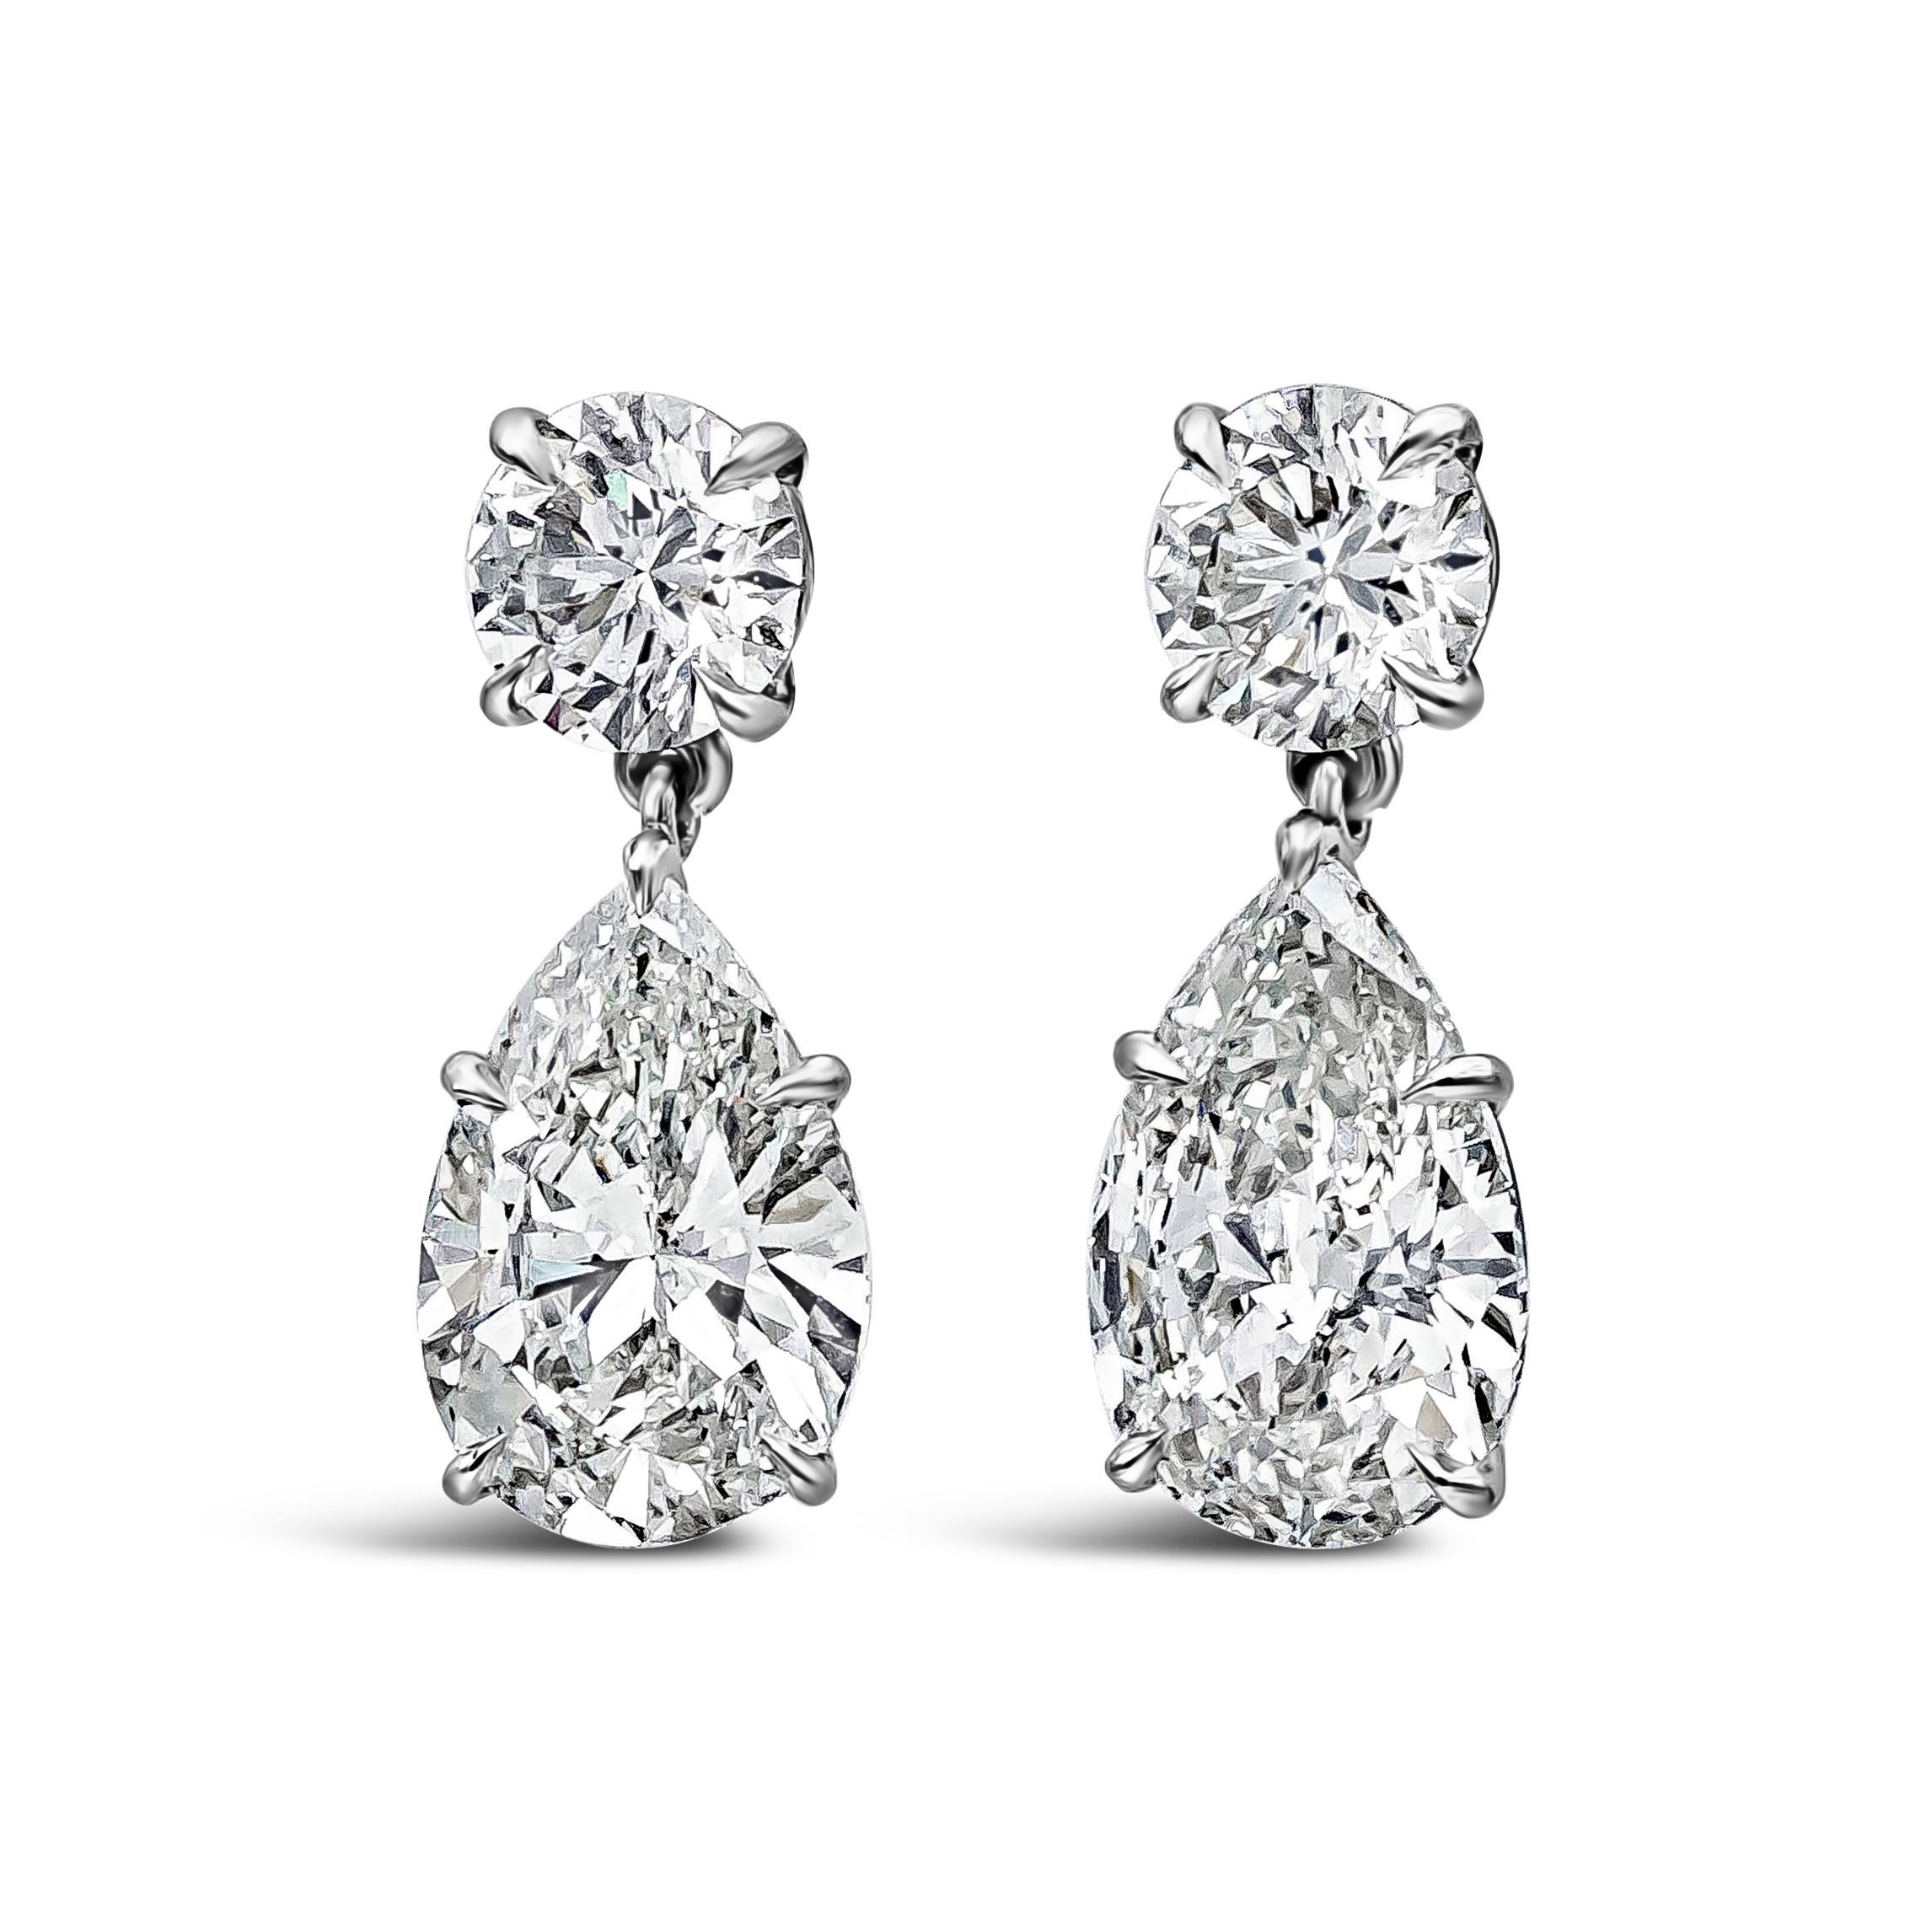 A classy pair of dangle earrings featuring a GIA Certified pear shape diamond drop suspended on a GIA Certified round brilliant diamond. Pear shape diamonds weigh 4.02 carats total, G-H Color and SI1 in Clarity. Round diamonds weigh 1.41 carats